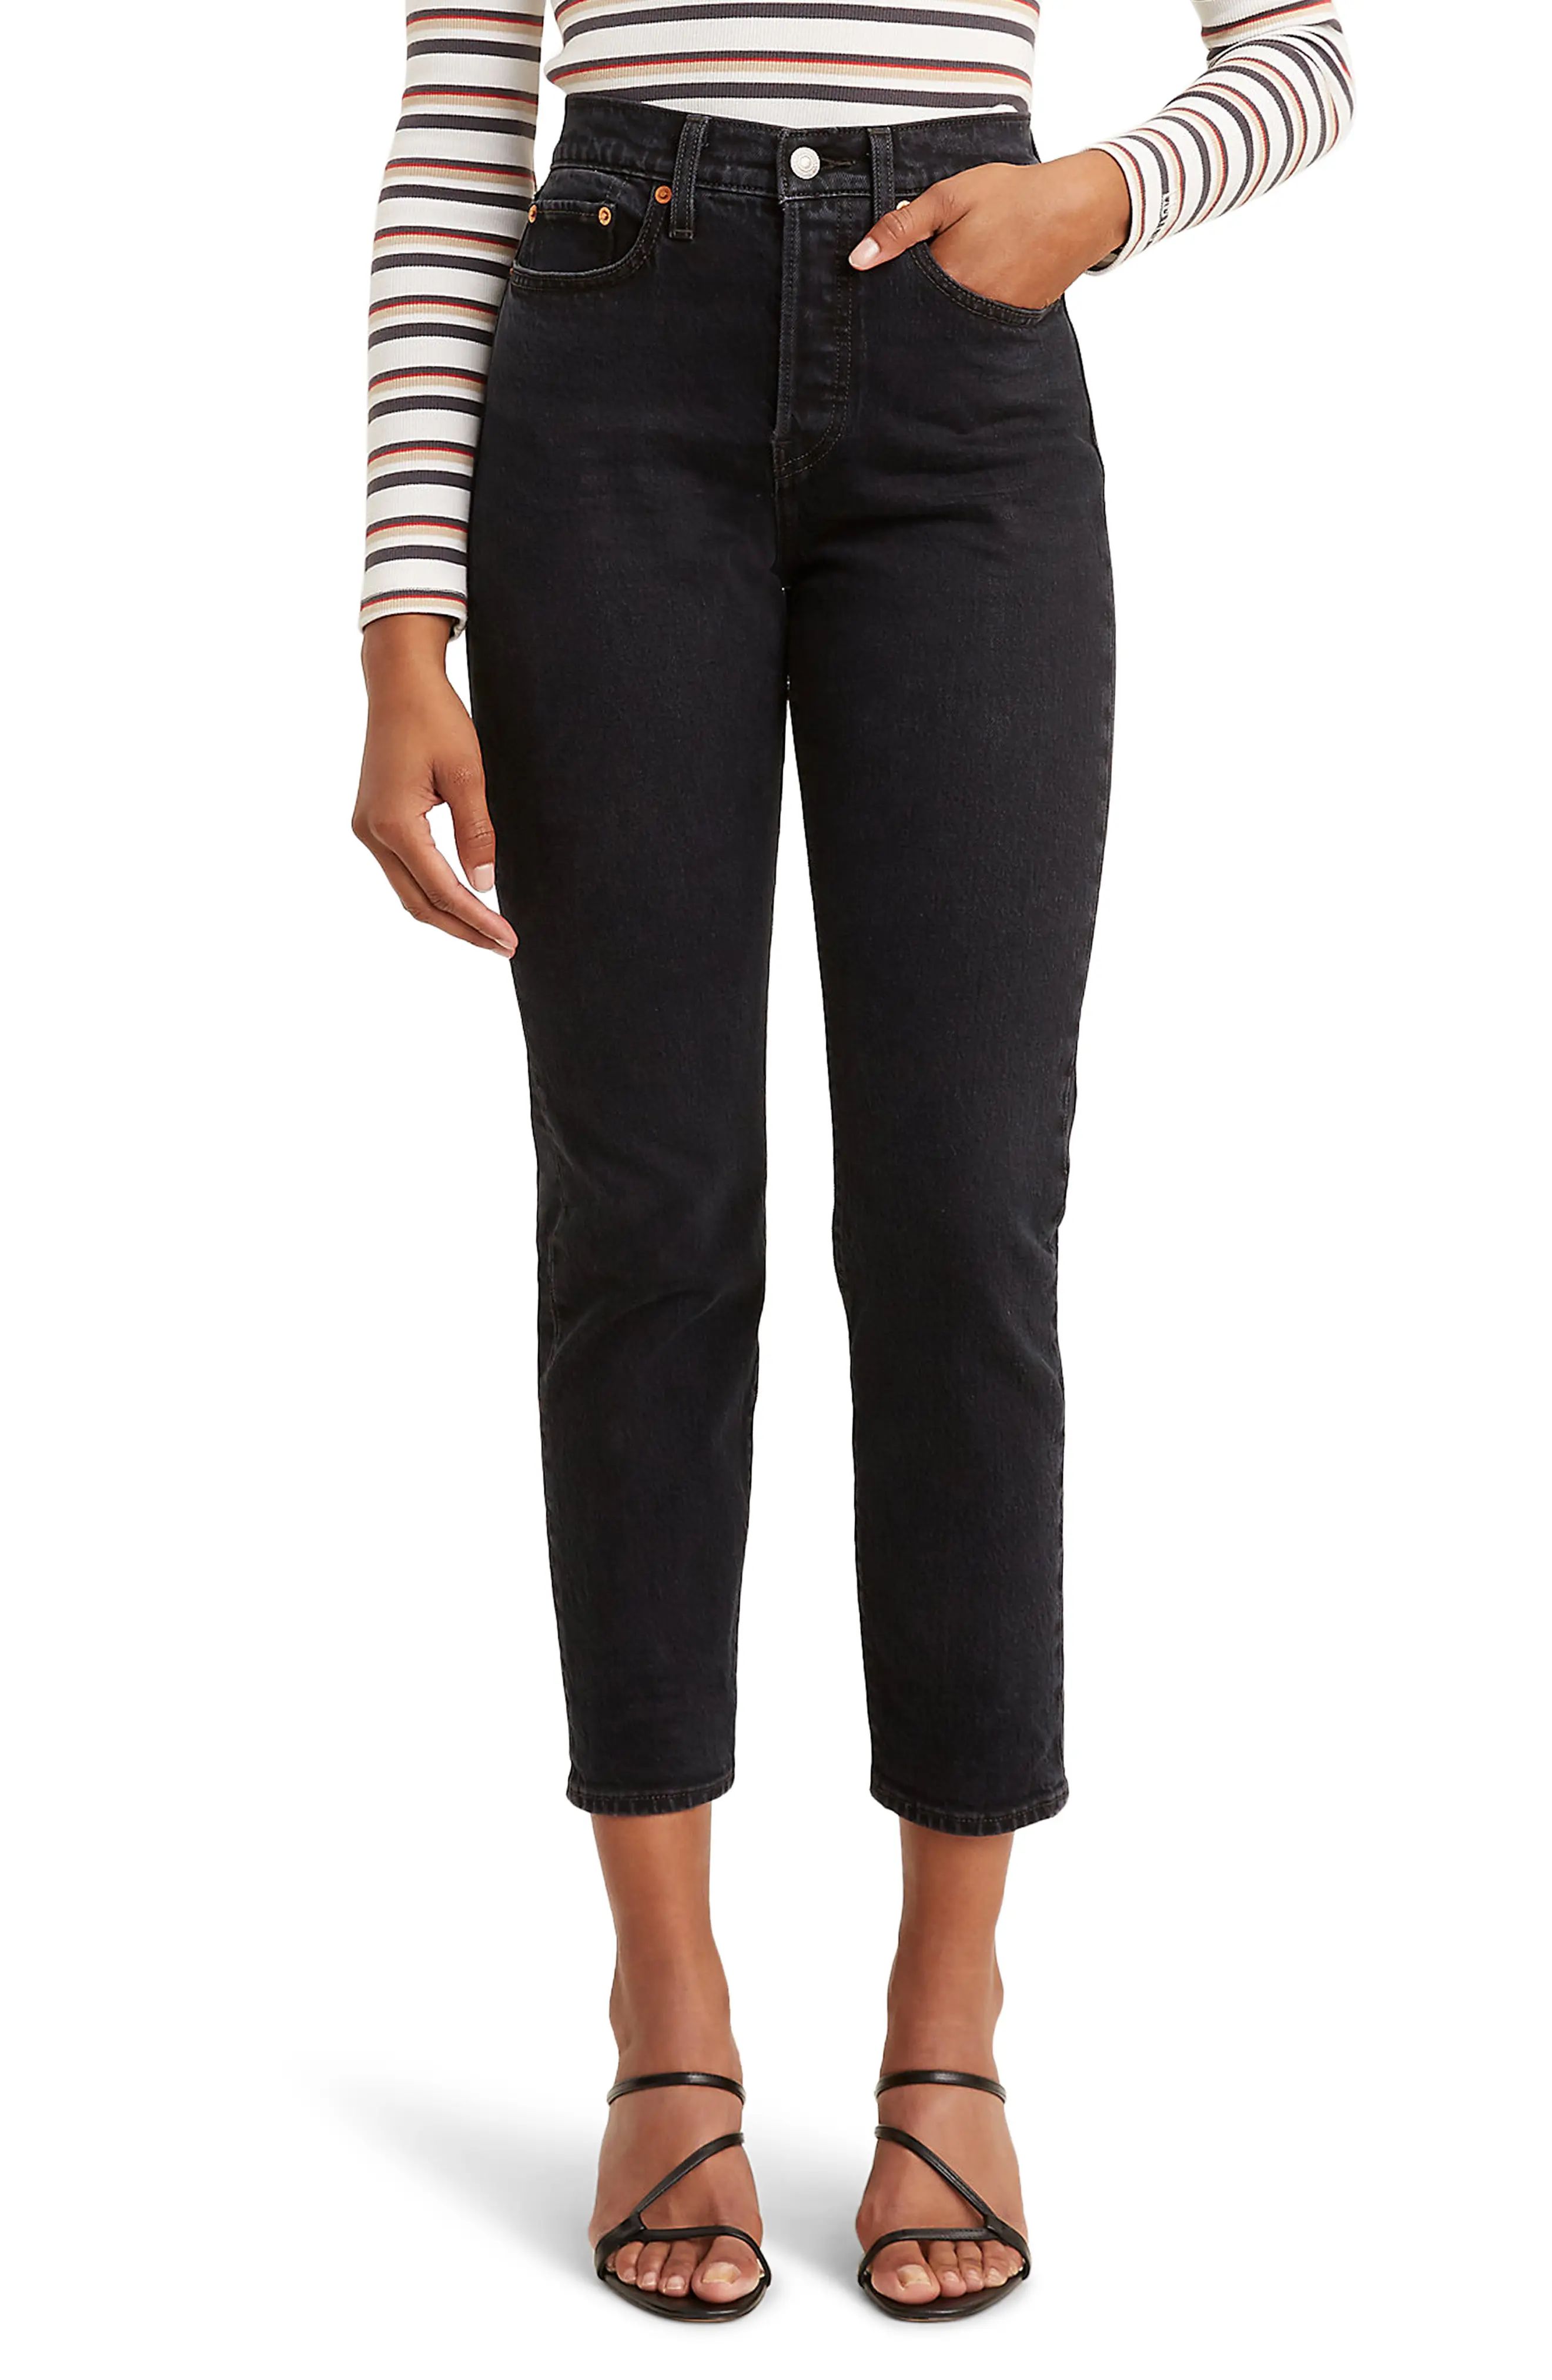 Women's Levi'S Wedgie Icon Fit High Waist Jeans, Size 32 - Black | Nordstrom